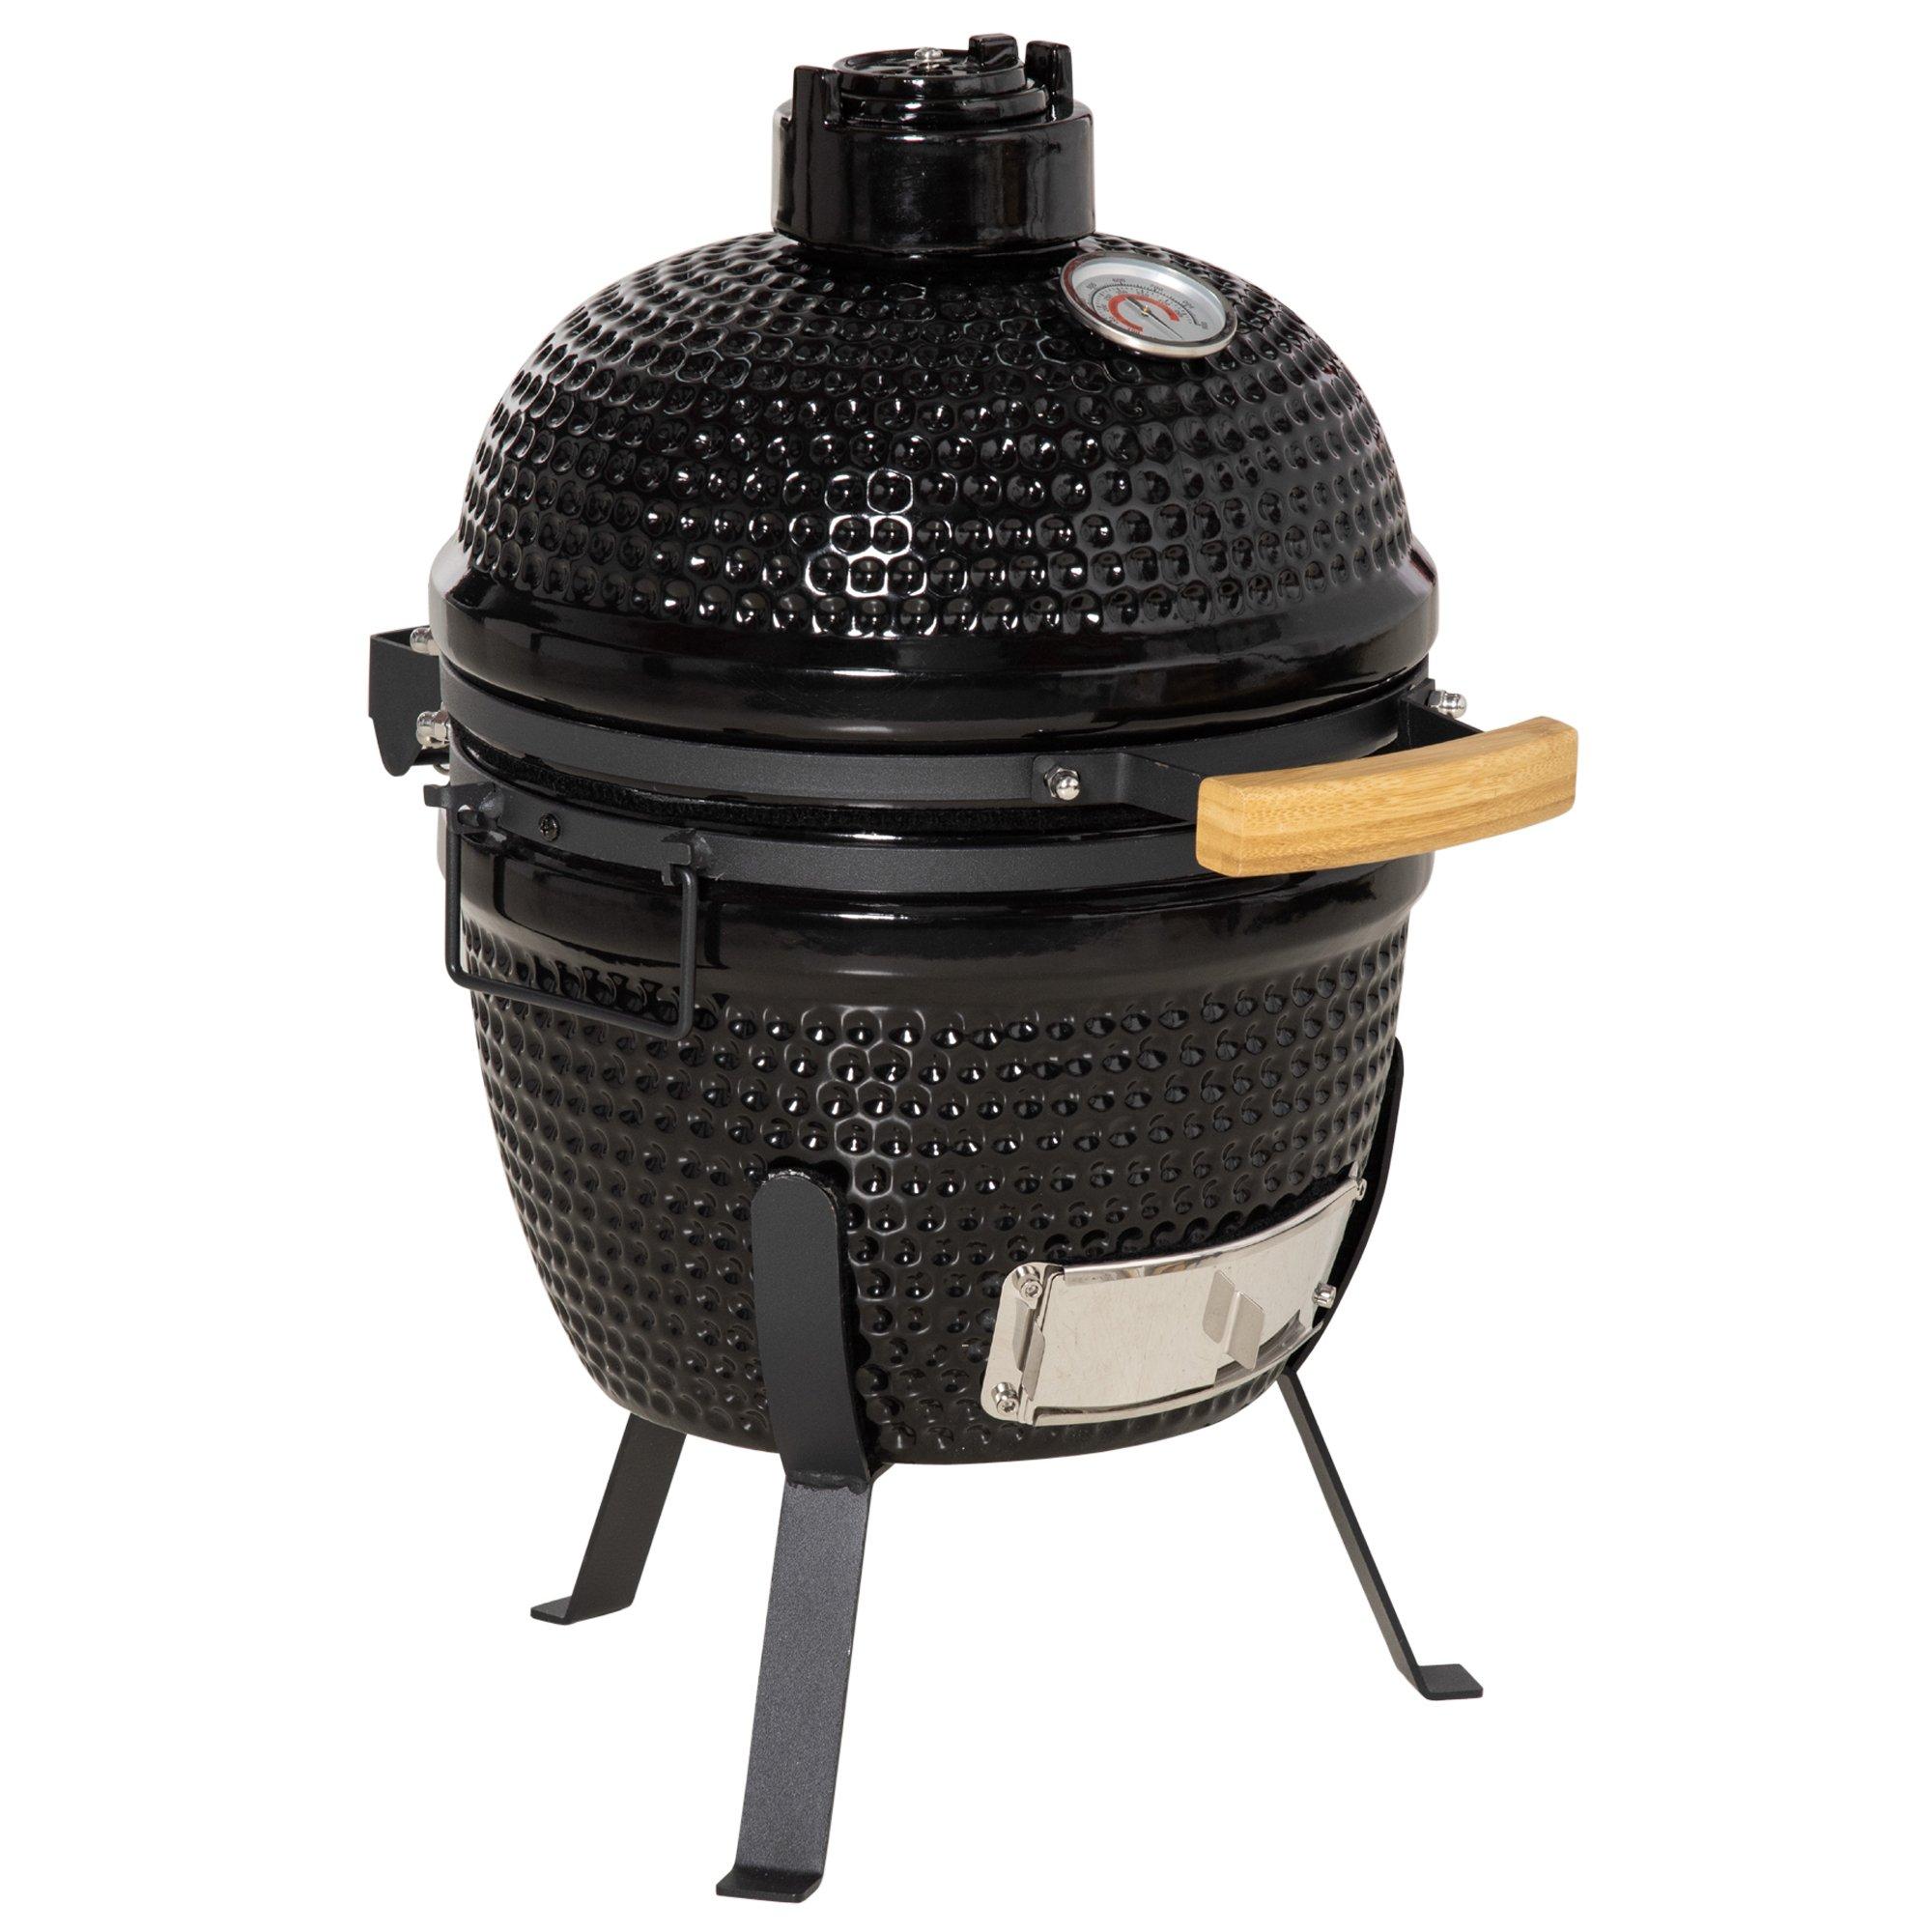 Charcoal Grill Cast Iron BBQ Cooking Smoker Standing Heat Control